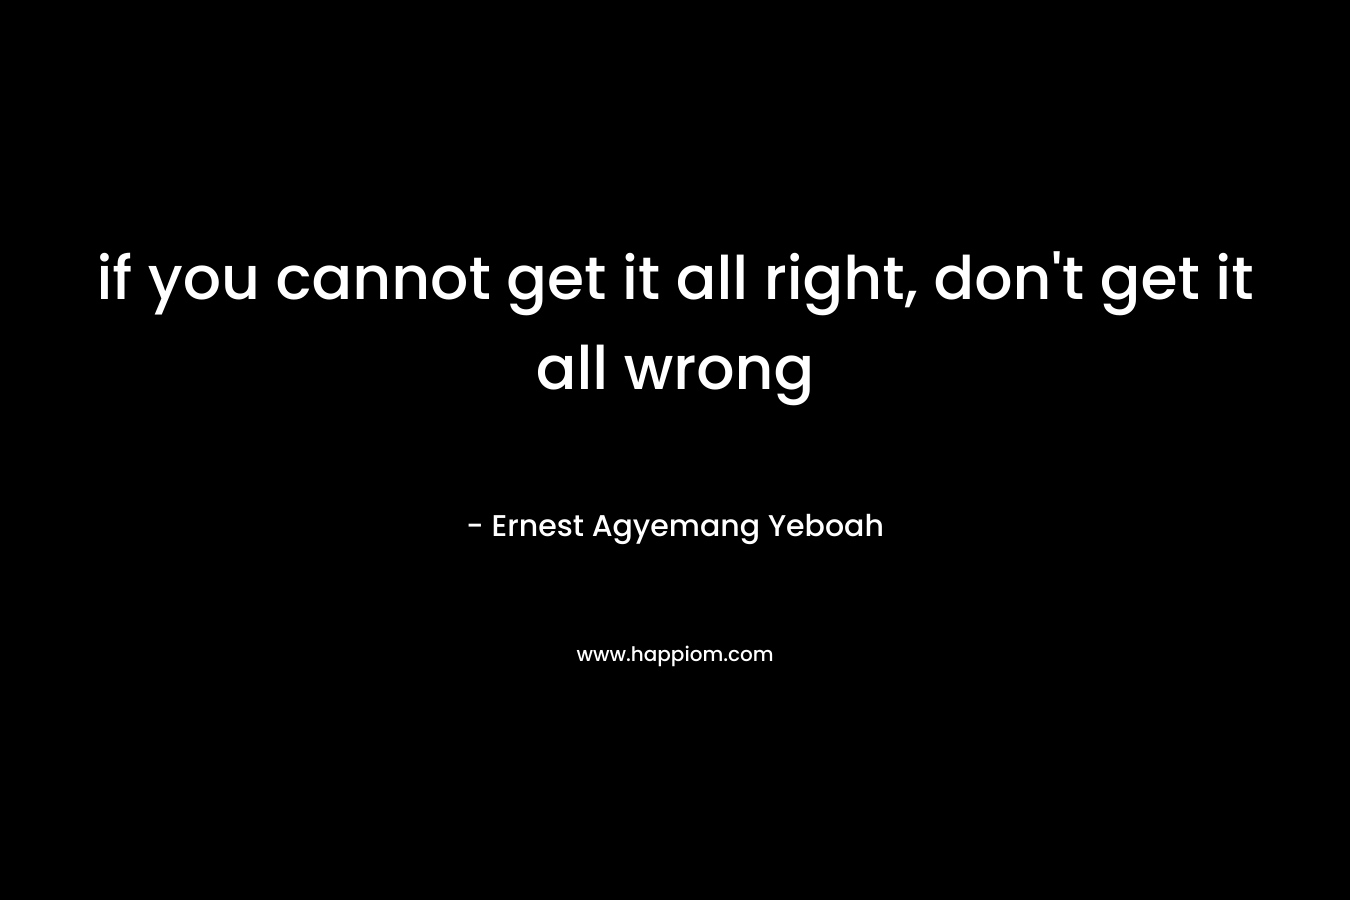 if you cannot get it all right, don't get it all wrong